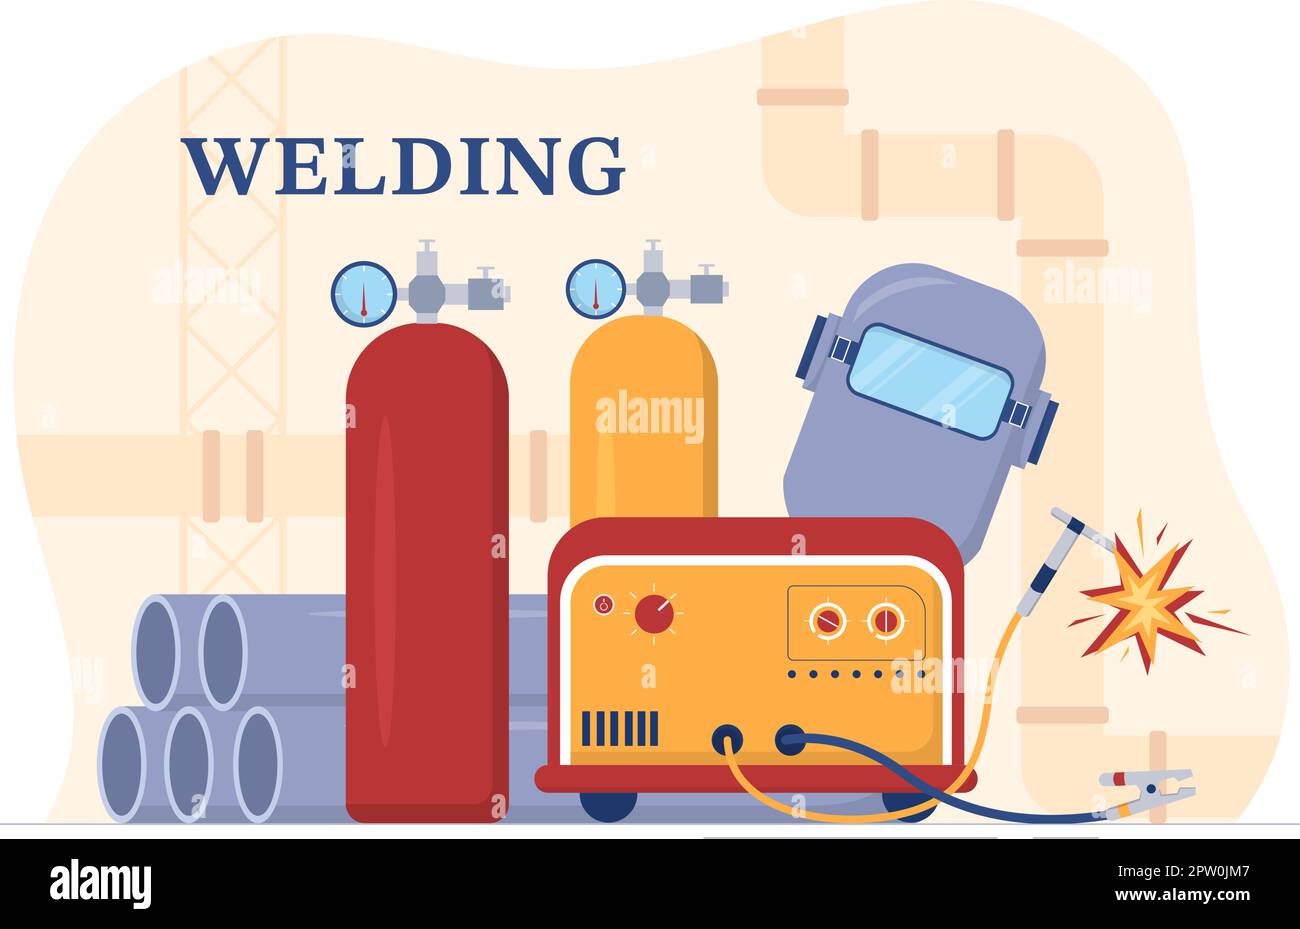 Welding Service with Professional Welder Job Weld Metal Structures, Pipe and Steel Construction in Flat Cartoon Hand Drawn Templates Illustration Stock Vector